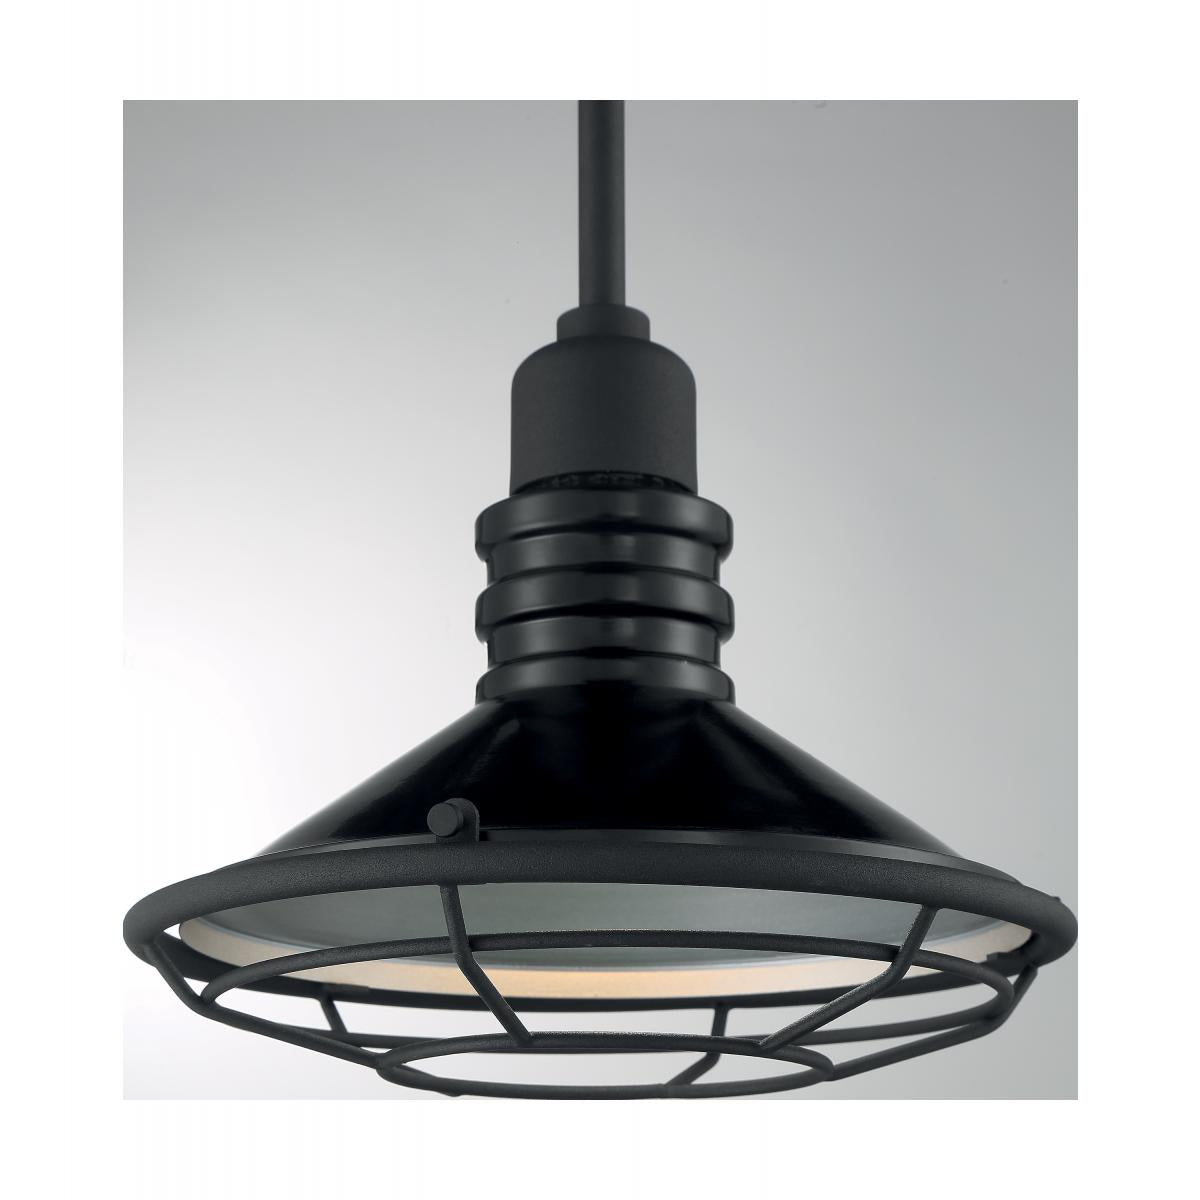 Blue Harbor - 1 Light Small Pendant with Black and Silver - Black Accents Finish